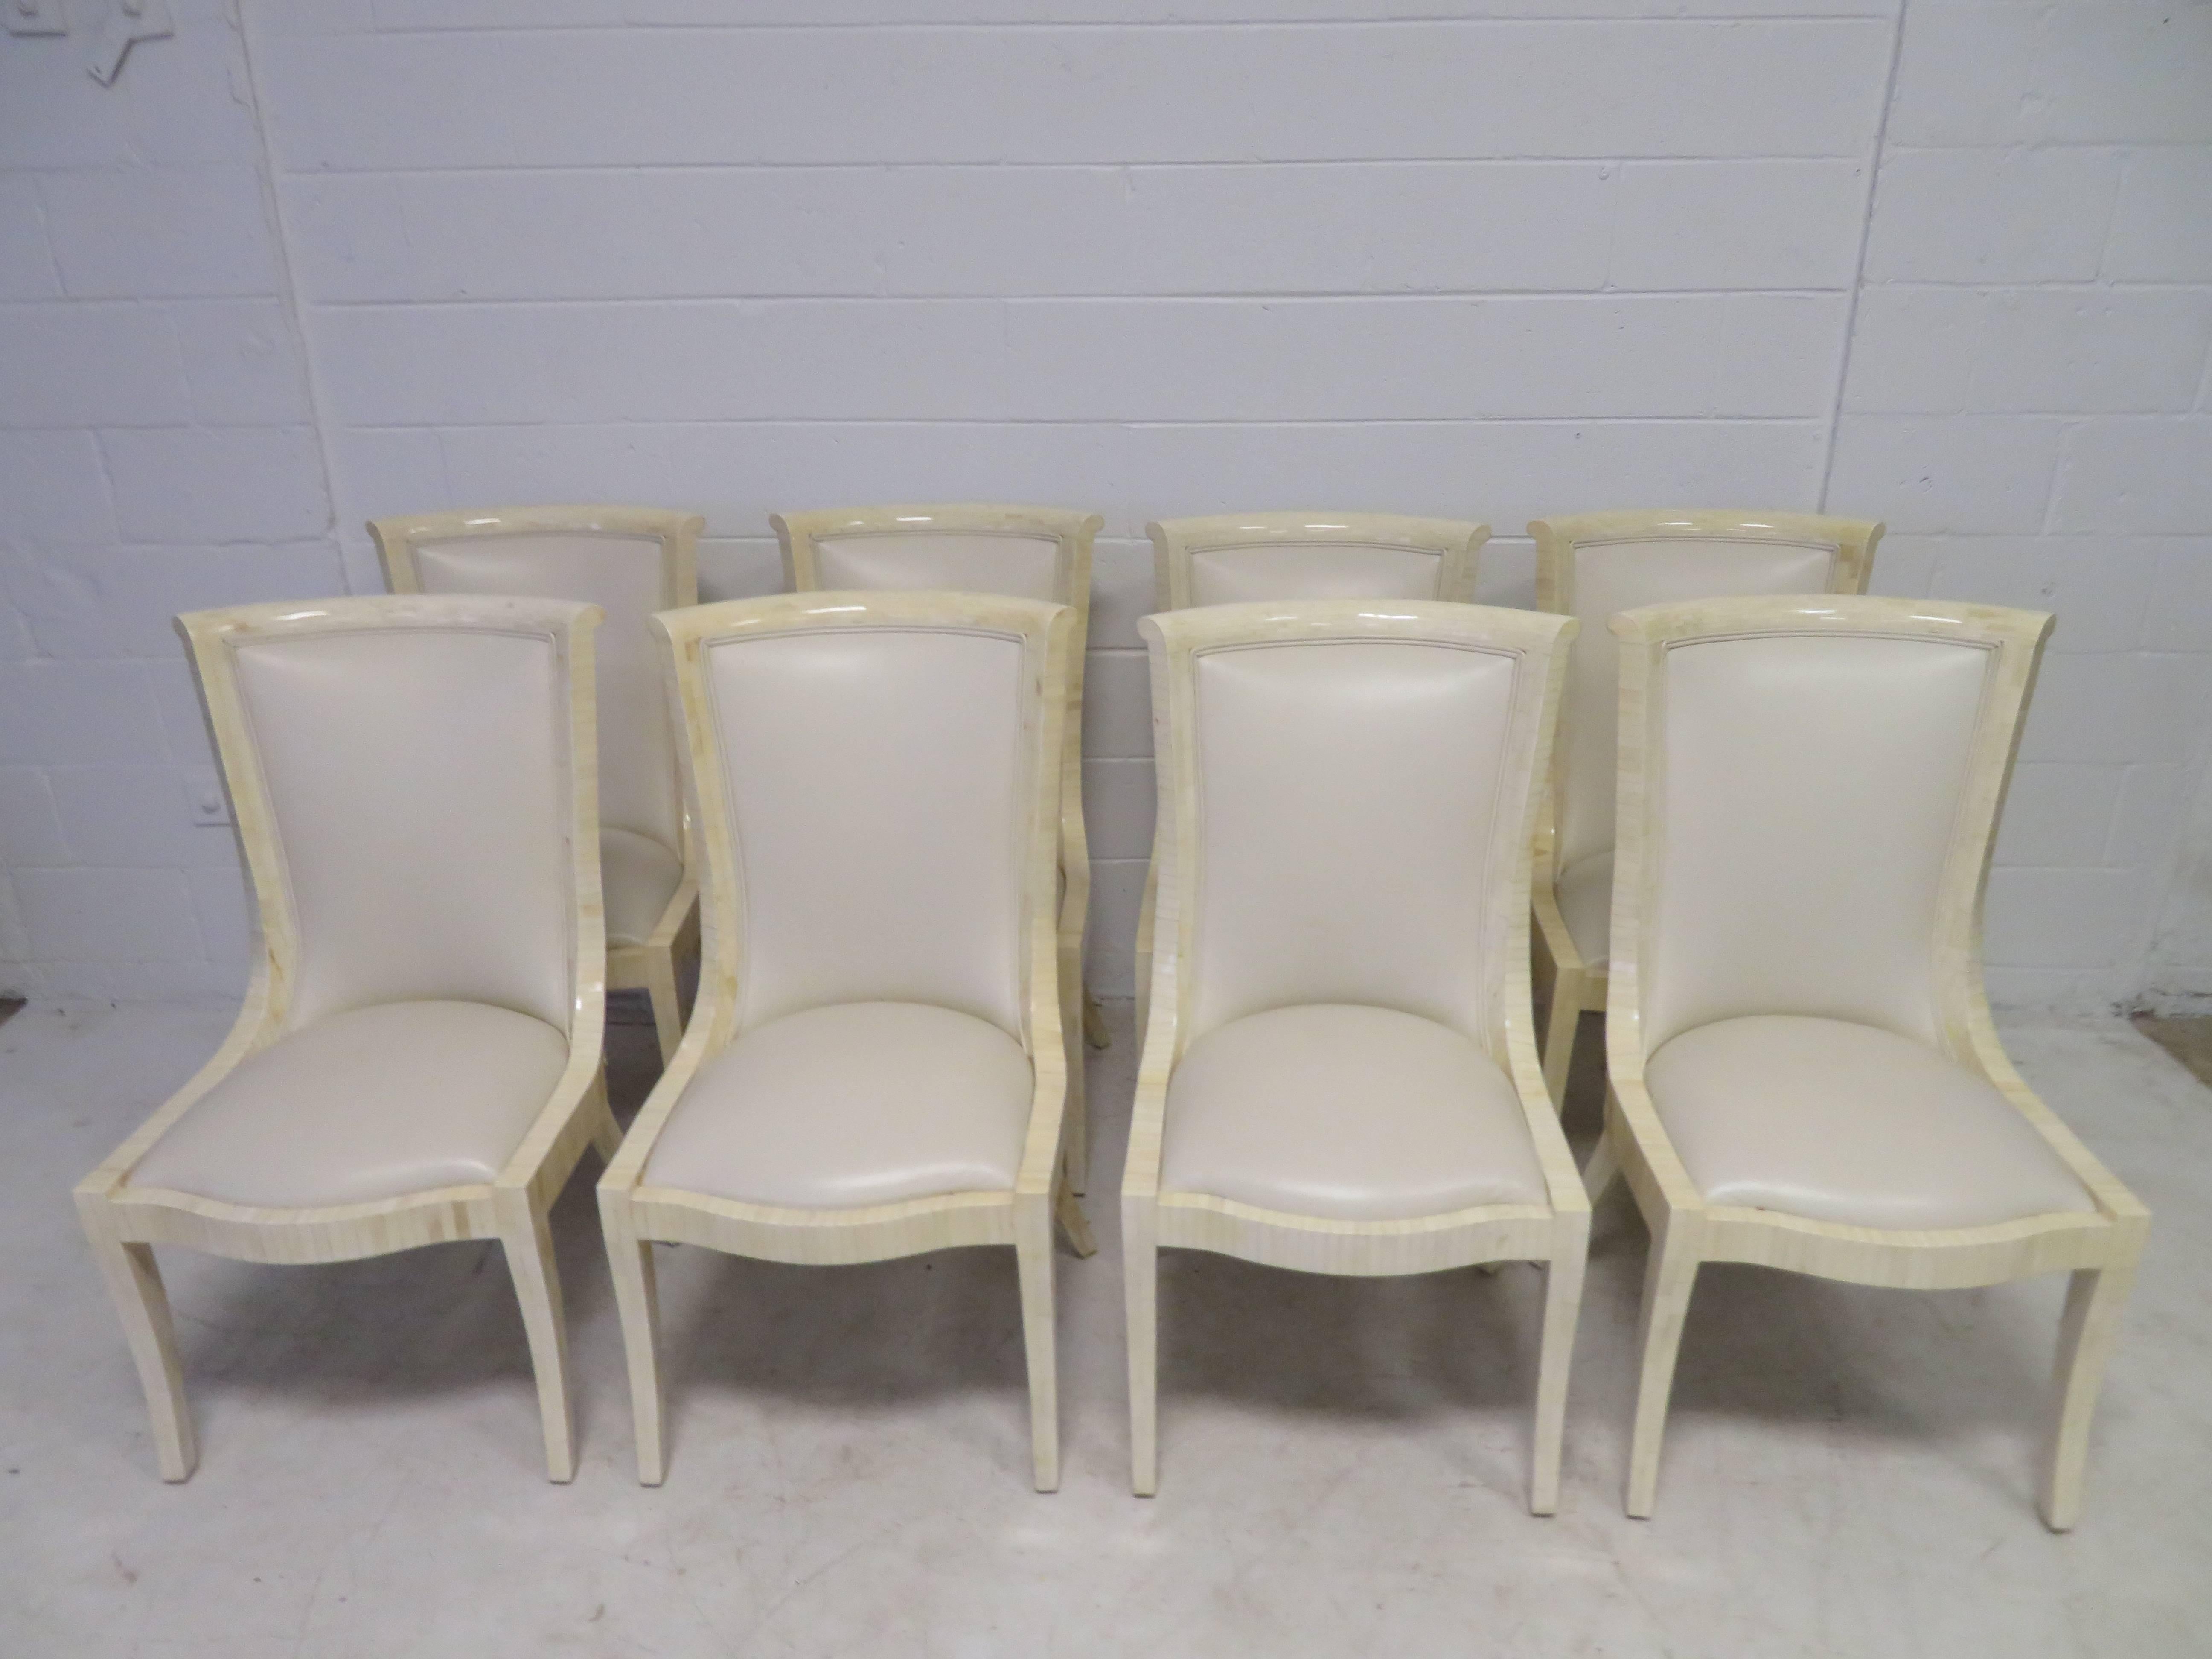 Outstanding set of Enrique Garcel tessellated ivory bone dining chairs with original leather upholstery. This set is in fantastic vintage condition and is rare to find a set so large. Set consists of two armchairs and eight sides.